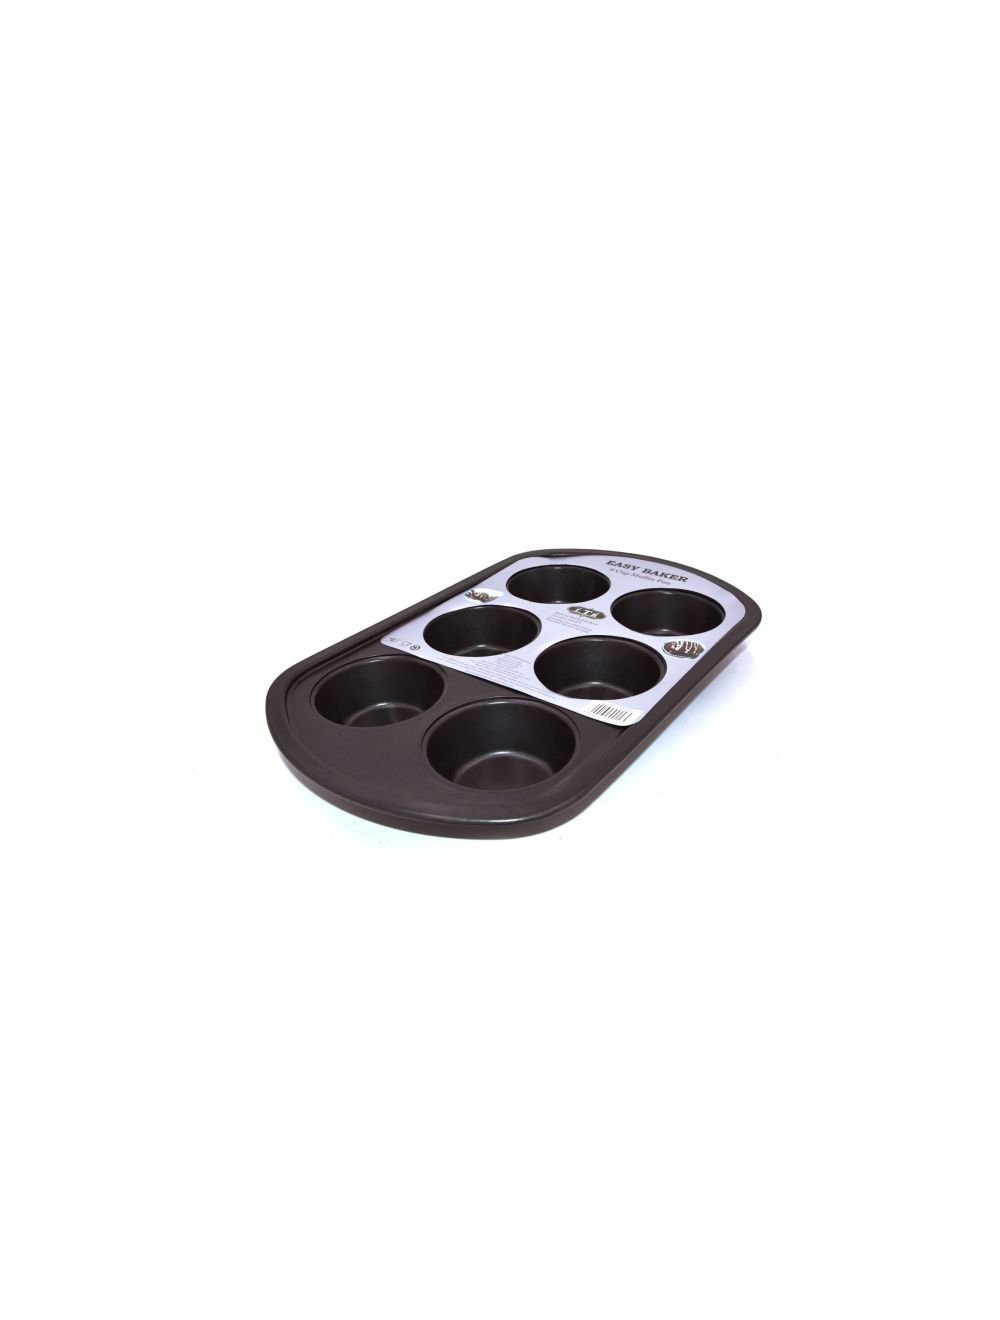 Easy Baker 31.6X19.5X3.3cm .6M 6 Cup Muffin Pan